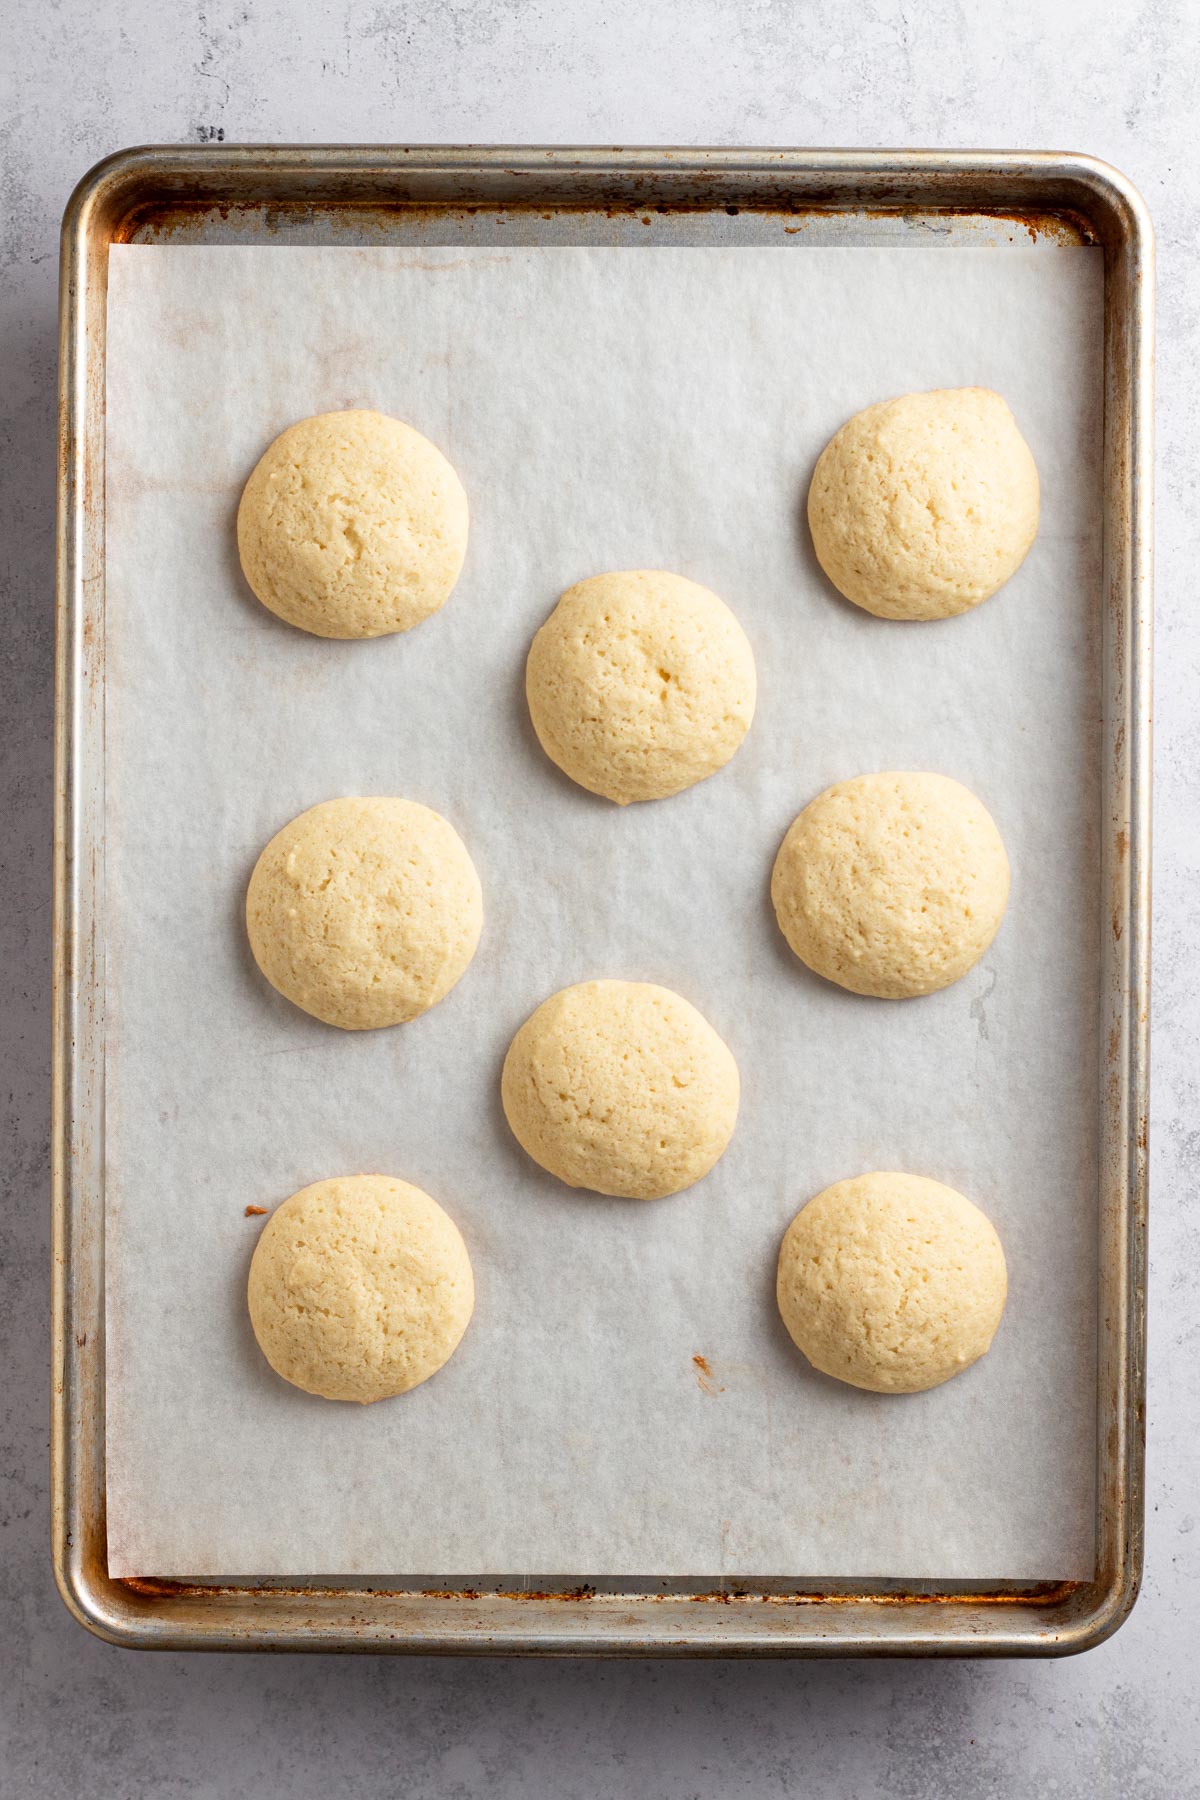 Baked cookies on a baking sheet lined with parchment paper.